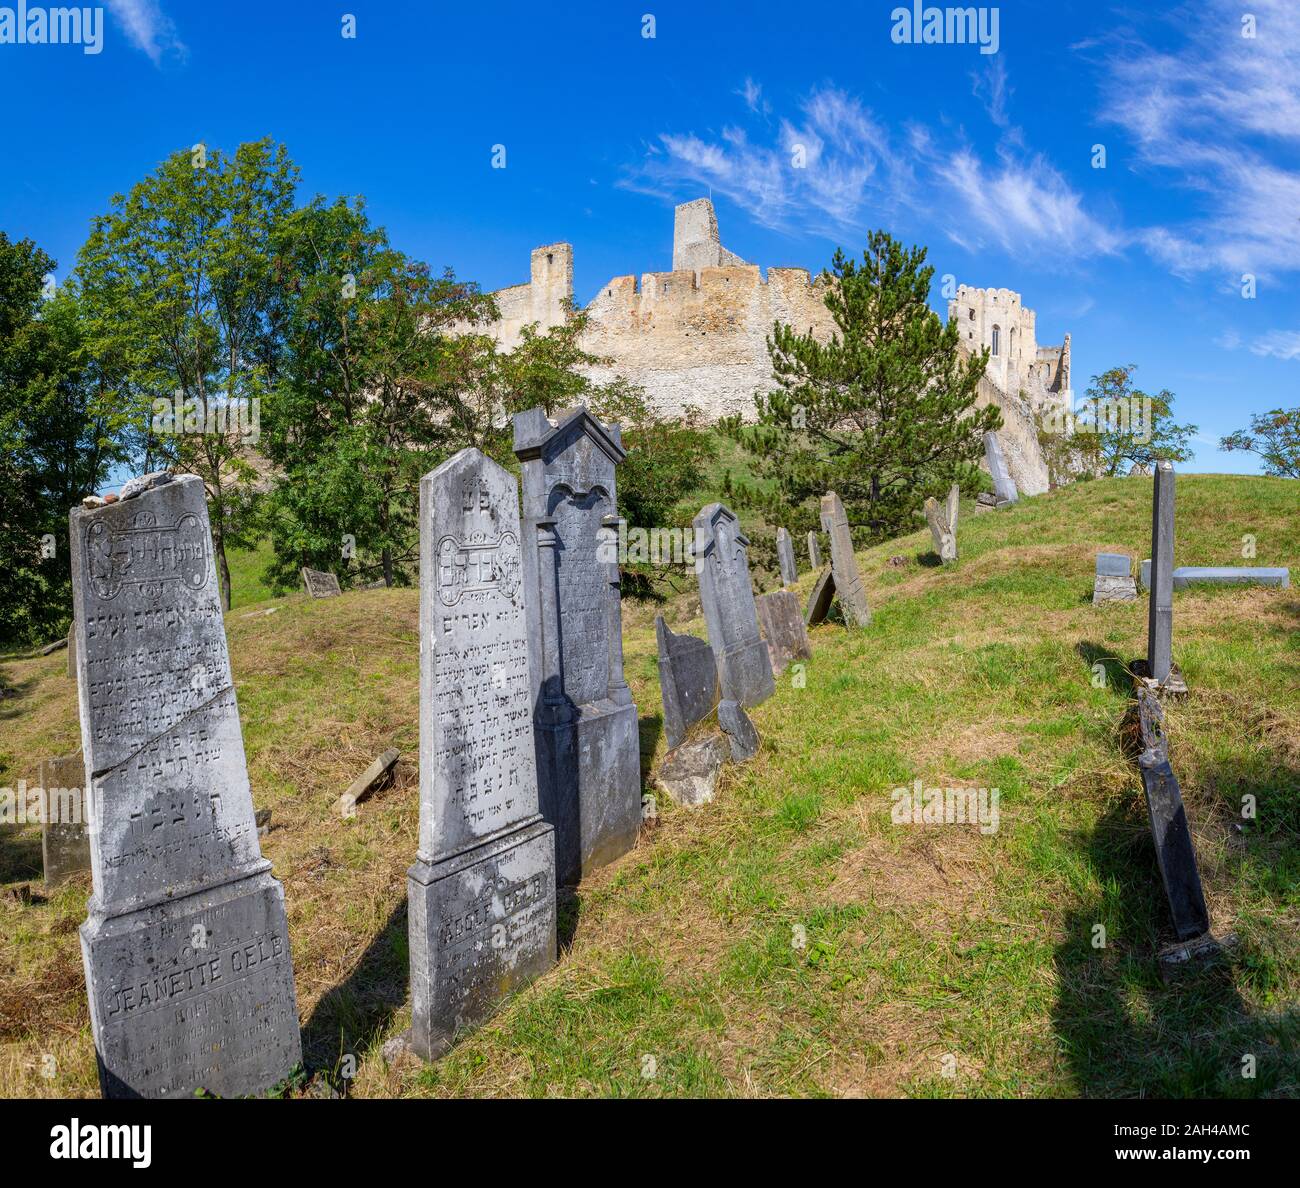 Slovakia, Nove Mesto nad Vahom District, Beckov, Old cemetery in front of ruins of Beckov Castle Stock Photo